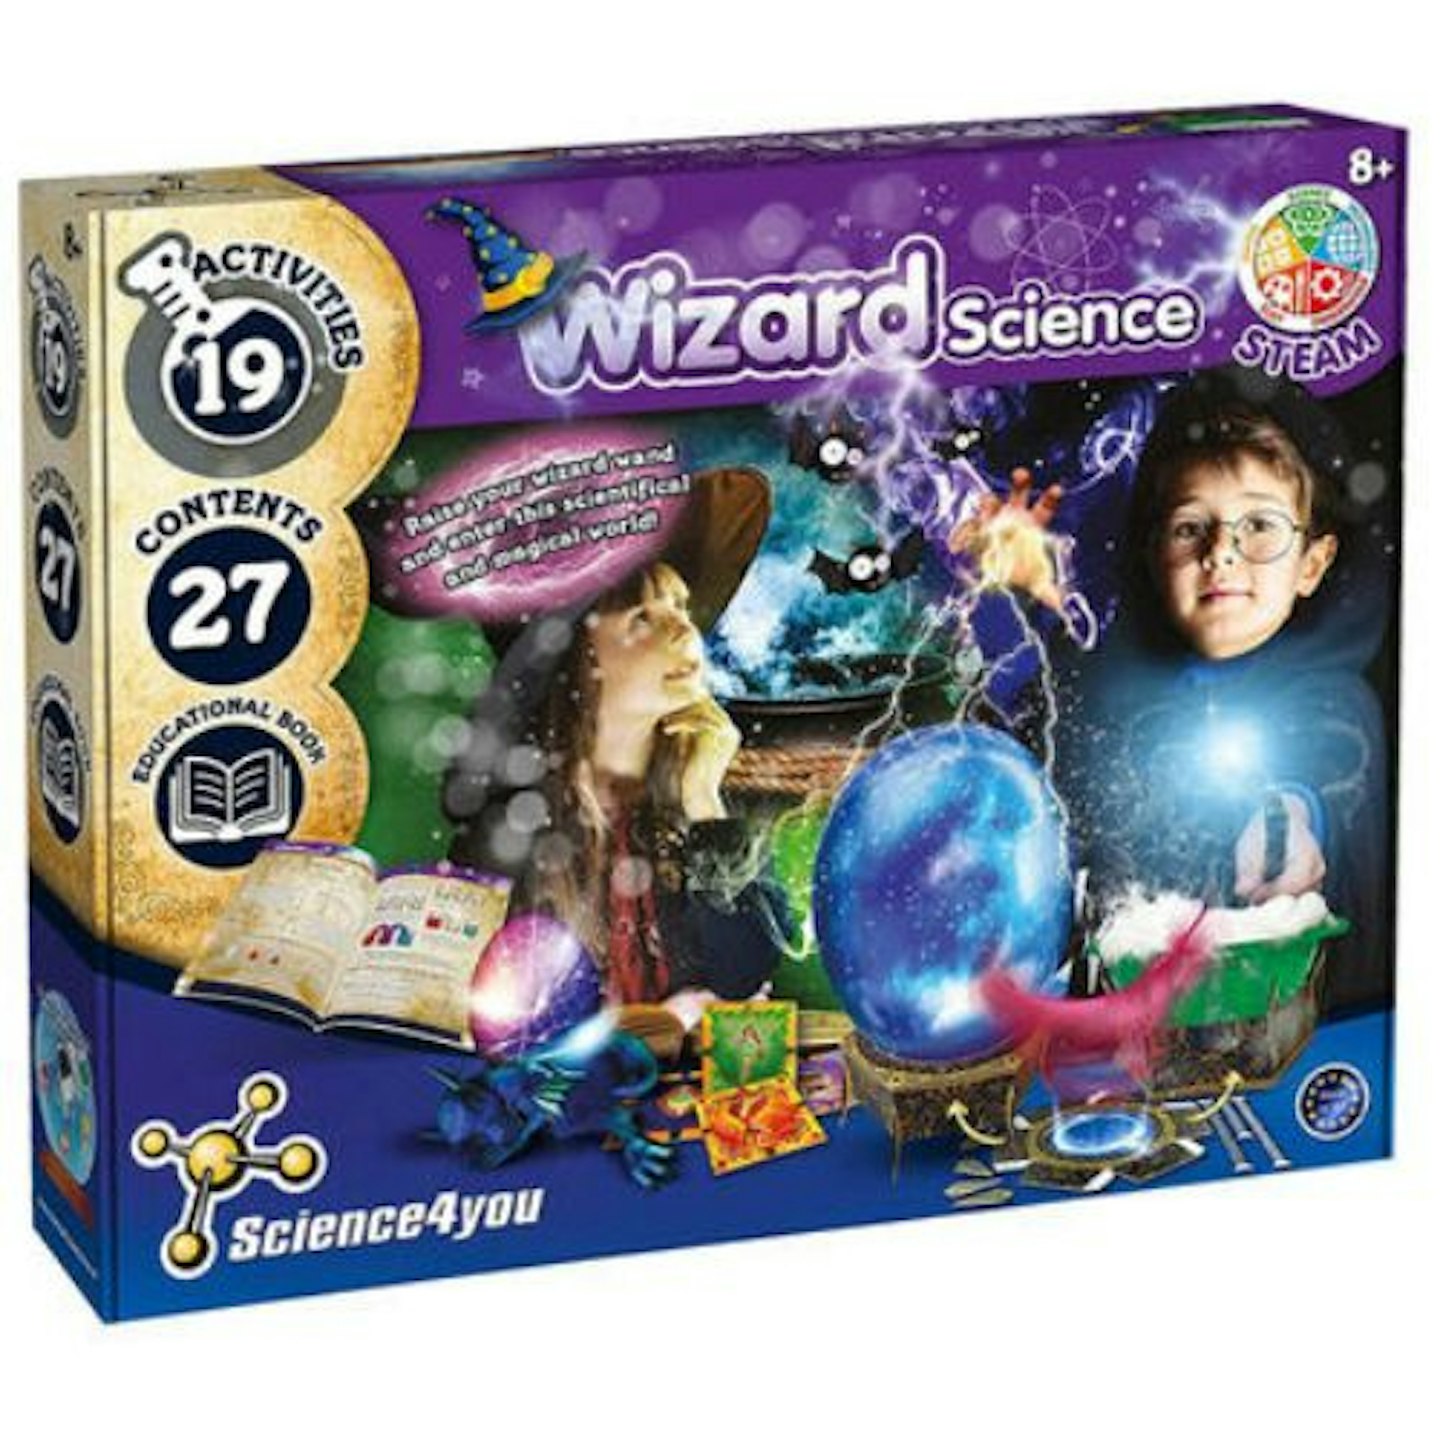 Wizard Science